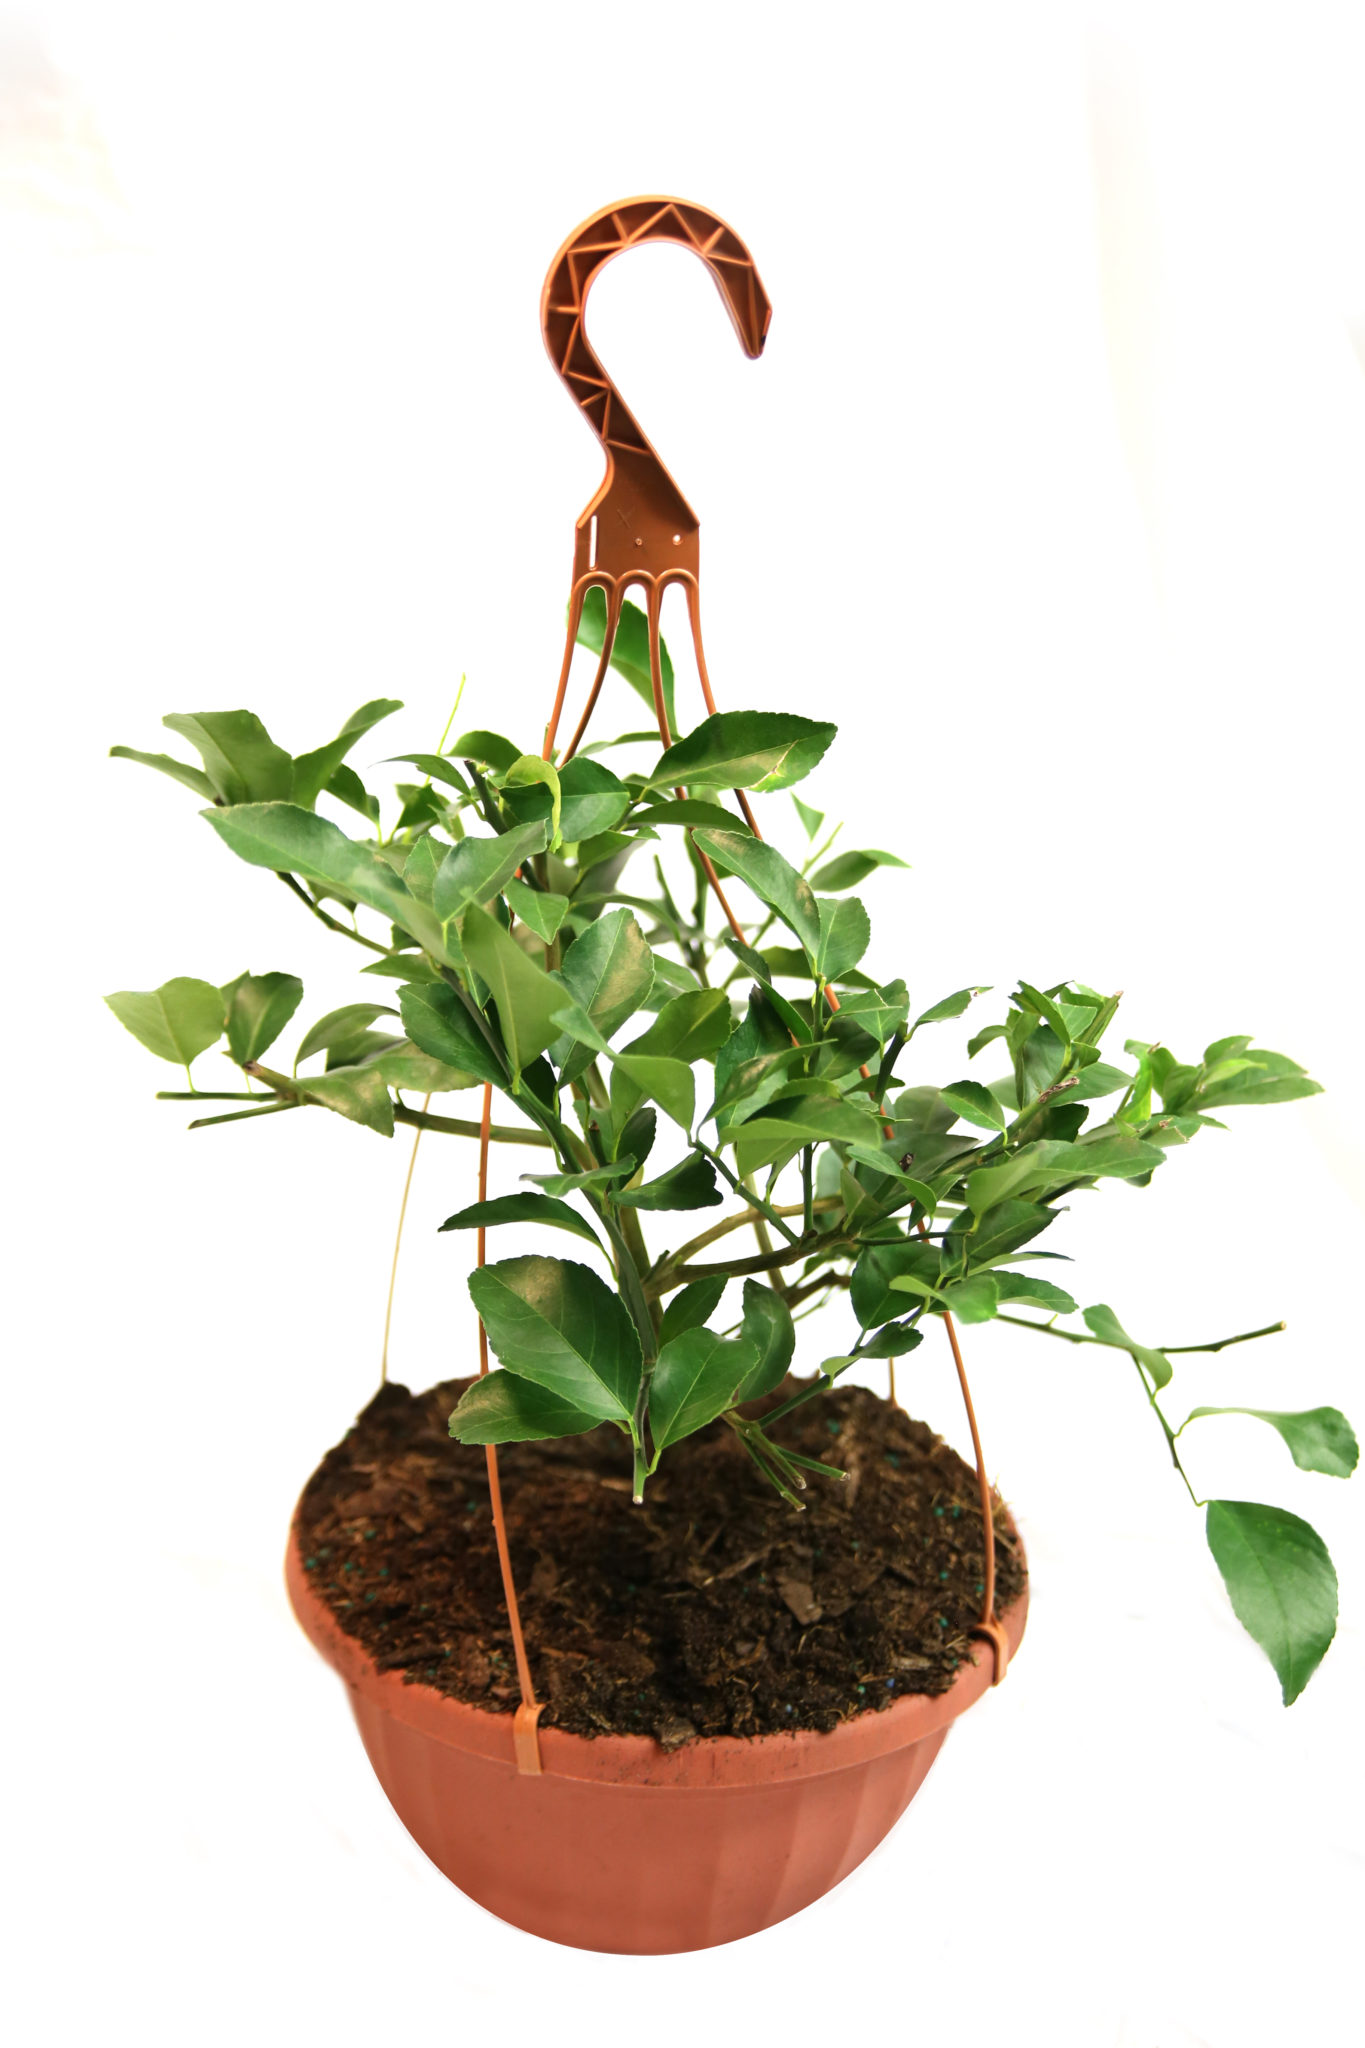 Image of Dwarf Persian Lime Hanging Basket (Age: 1 Year Height: 18 - 26 IN Drop Shipper: Grow Scripts)